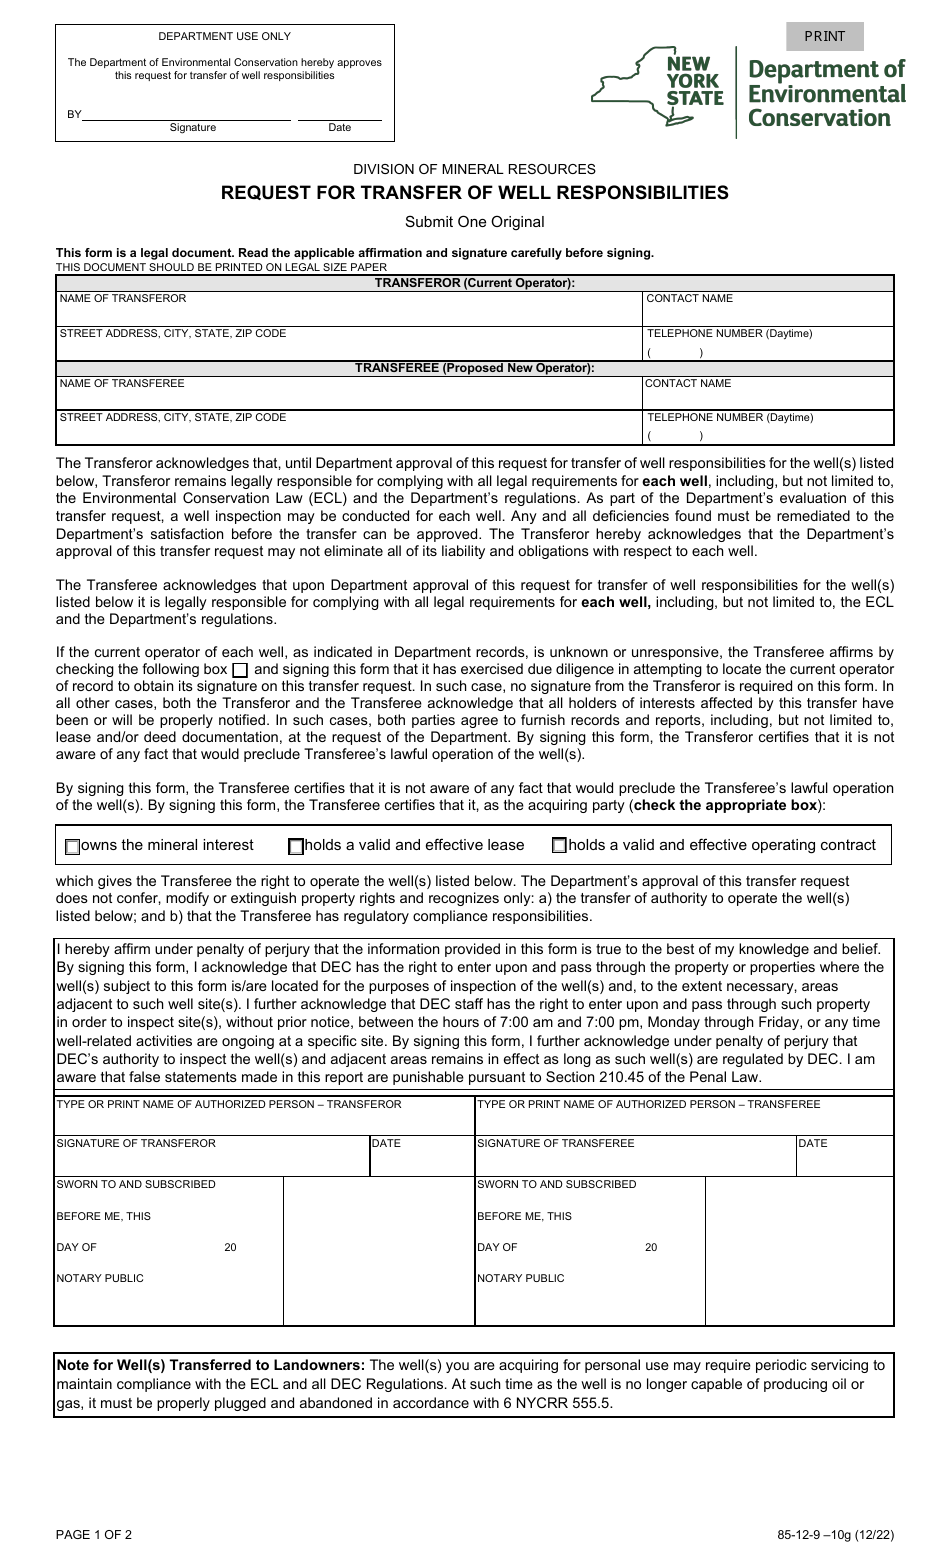 Form 85-12-9-10G Request for Transfer of Well Responsibilities - New York, Page 1